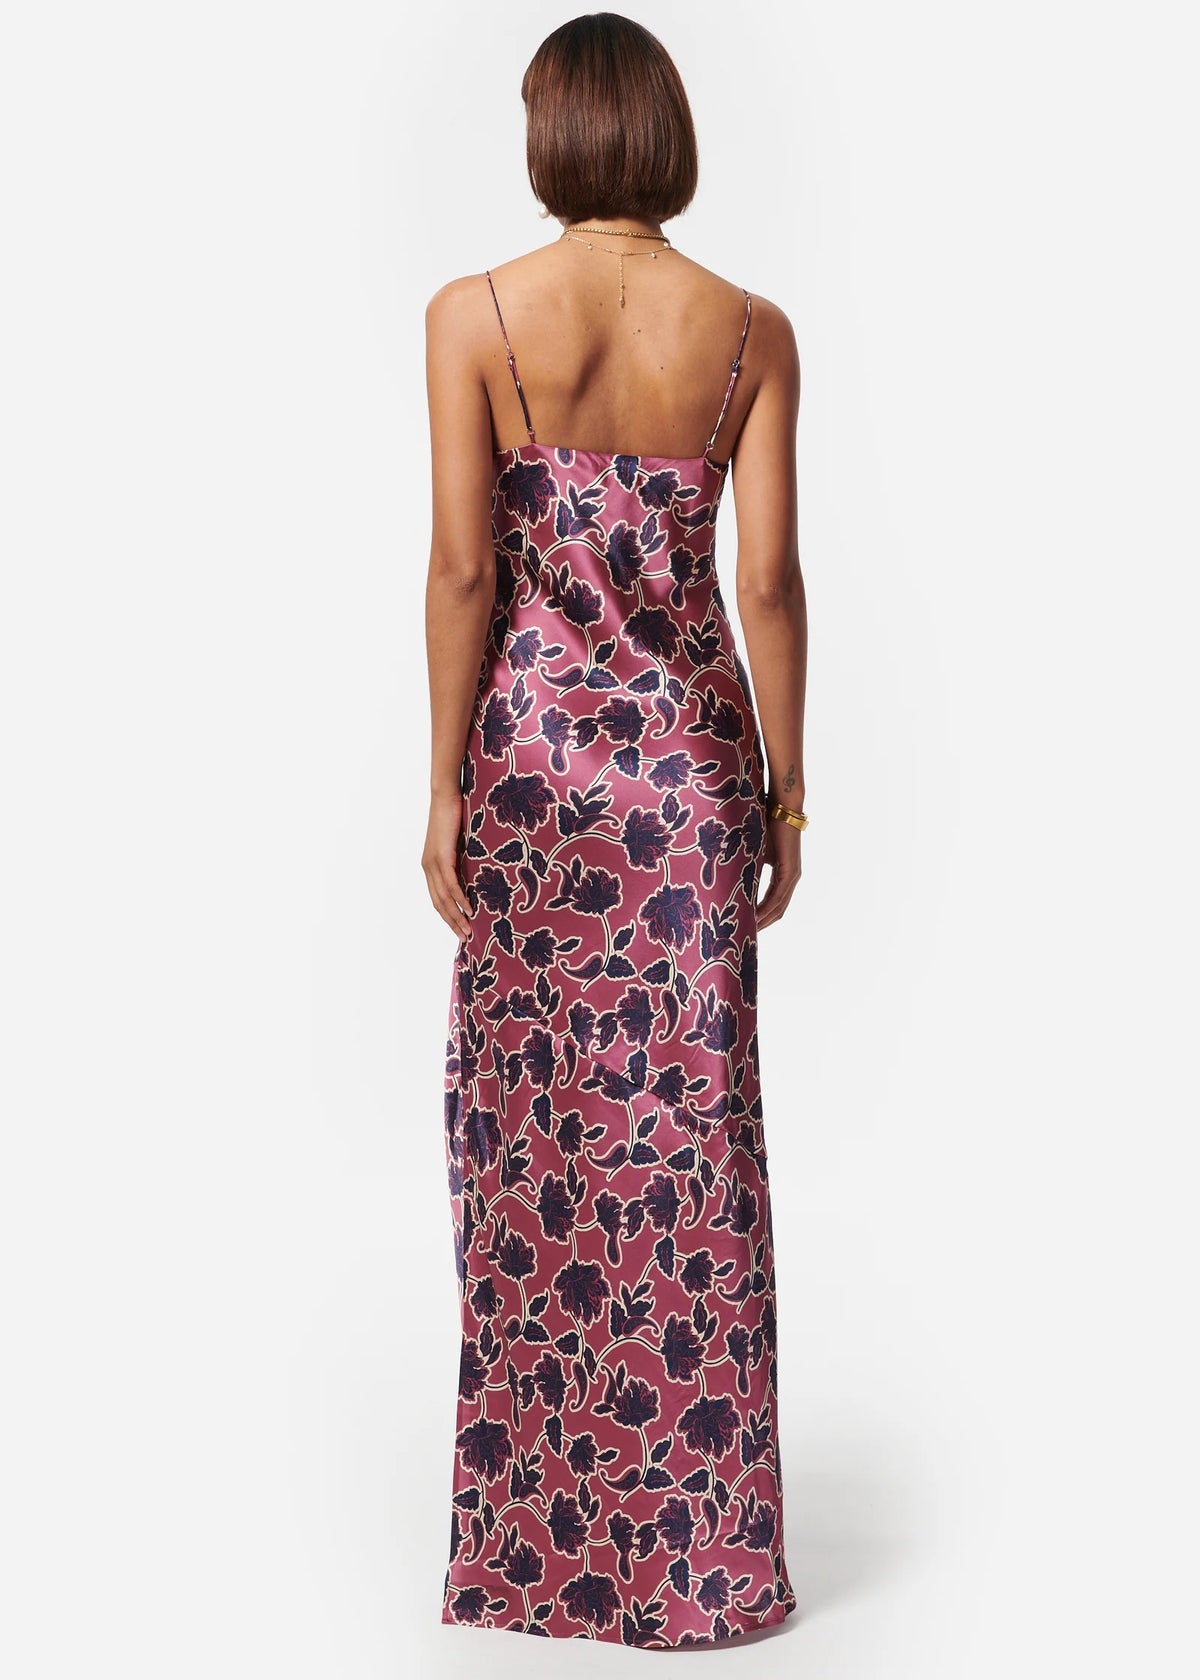 CAMI NYC Raven Gown BAROQUE PAISLEY